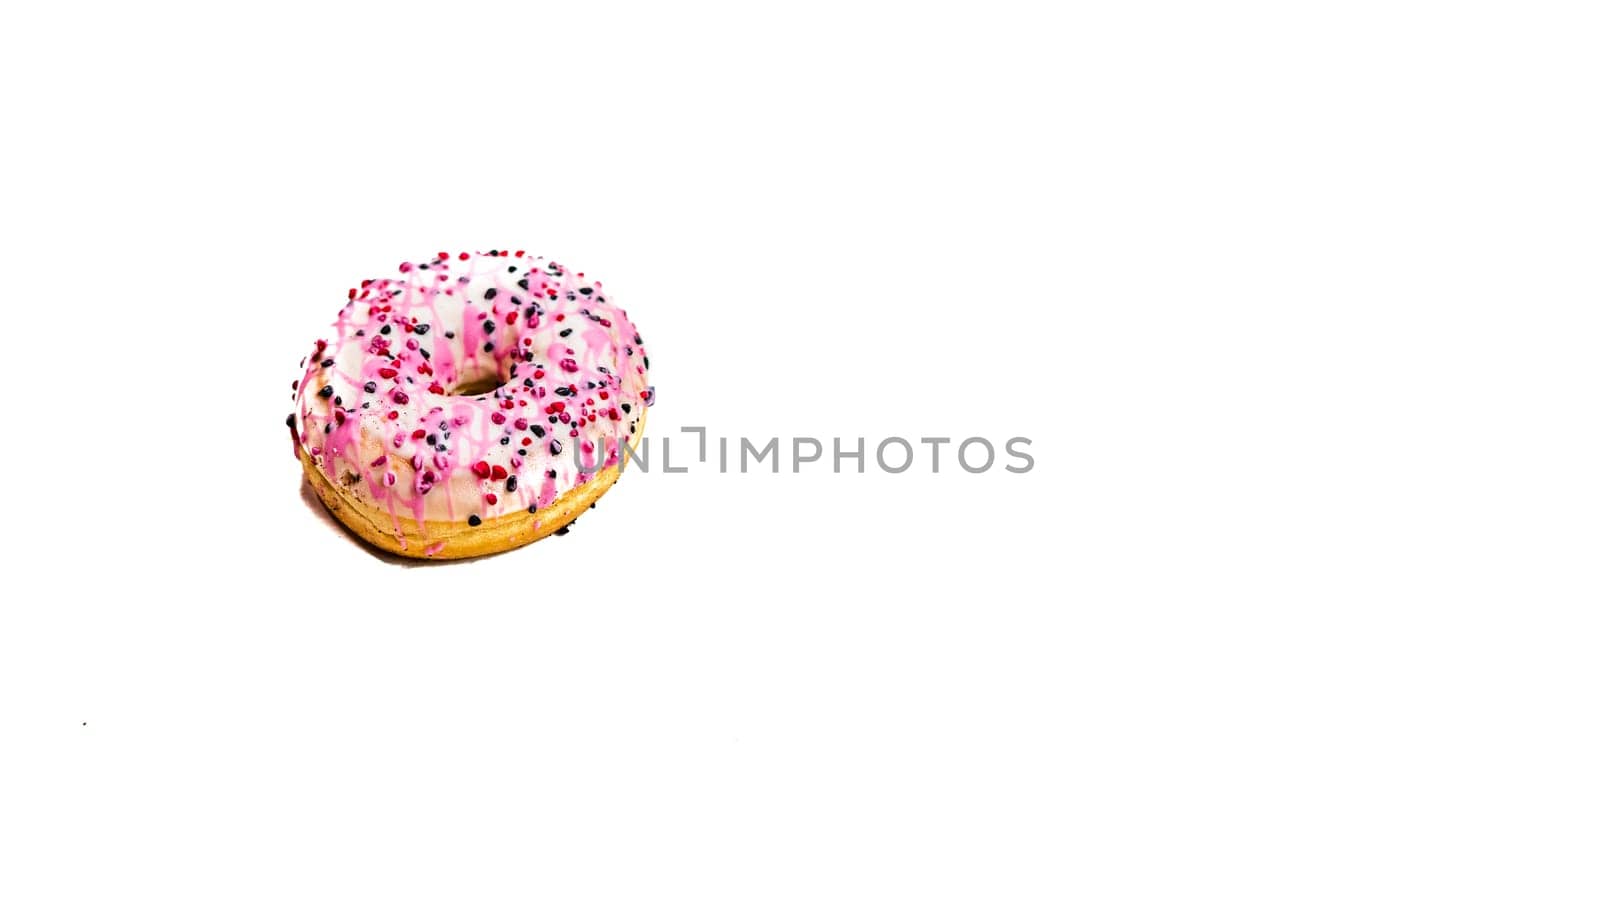 Colorful donut isolated on white. Sweet icing sugar food with glazed sprinkles, doughnut with frosting. Top view with copy space by vladispas